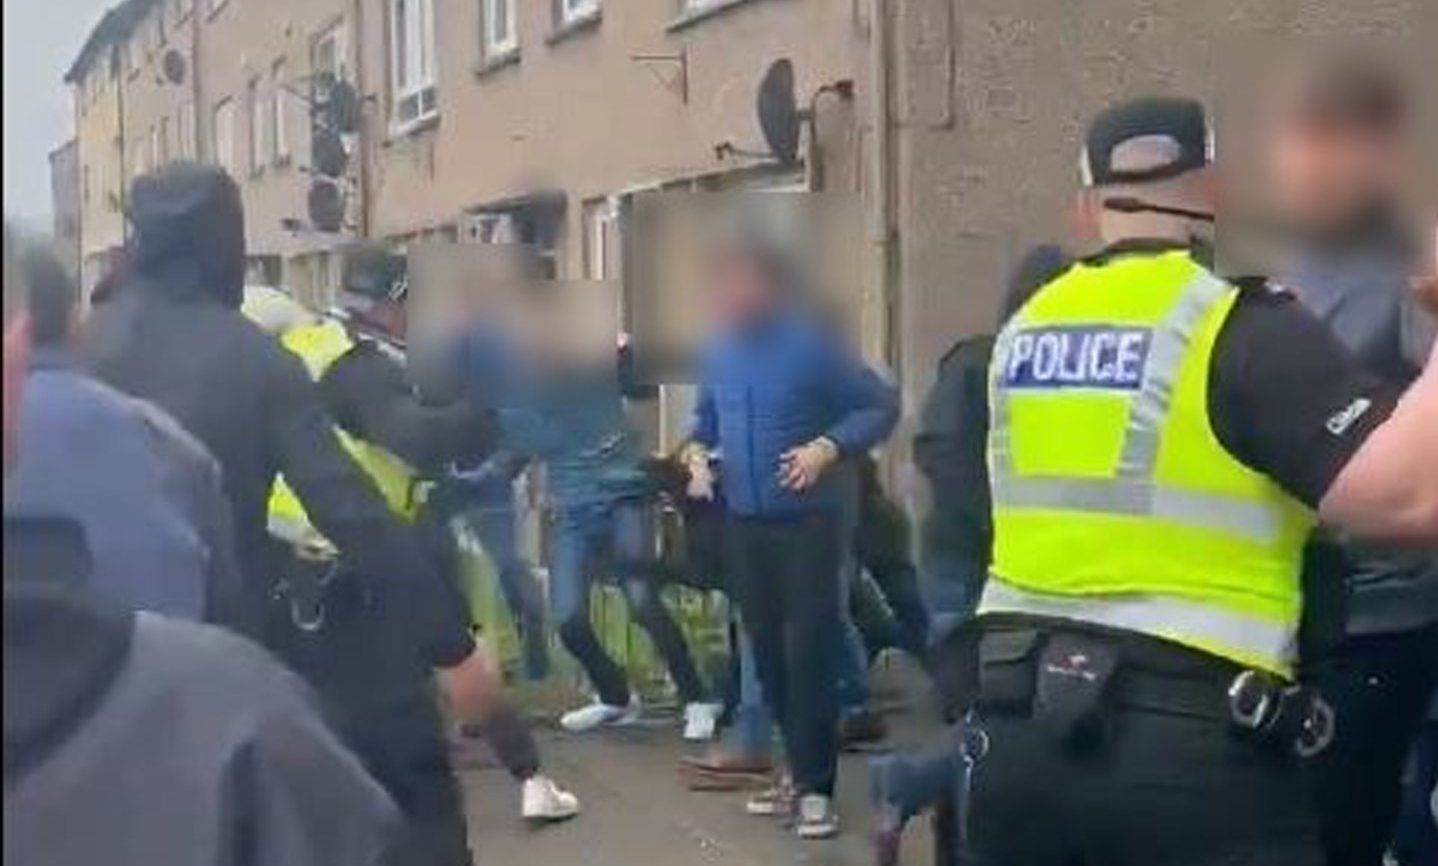 Fighting broke out between Raith Rovers and Dunfermline Athletic fans on Saturday.